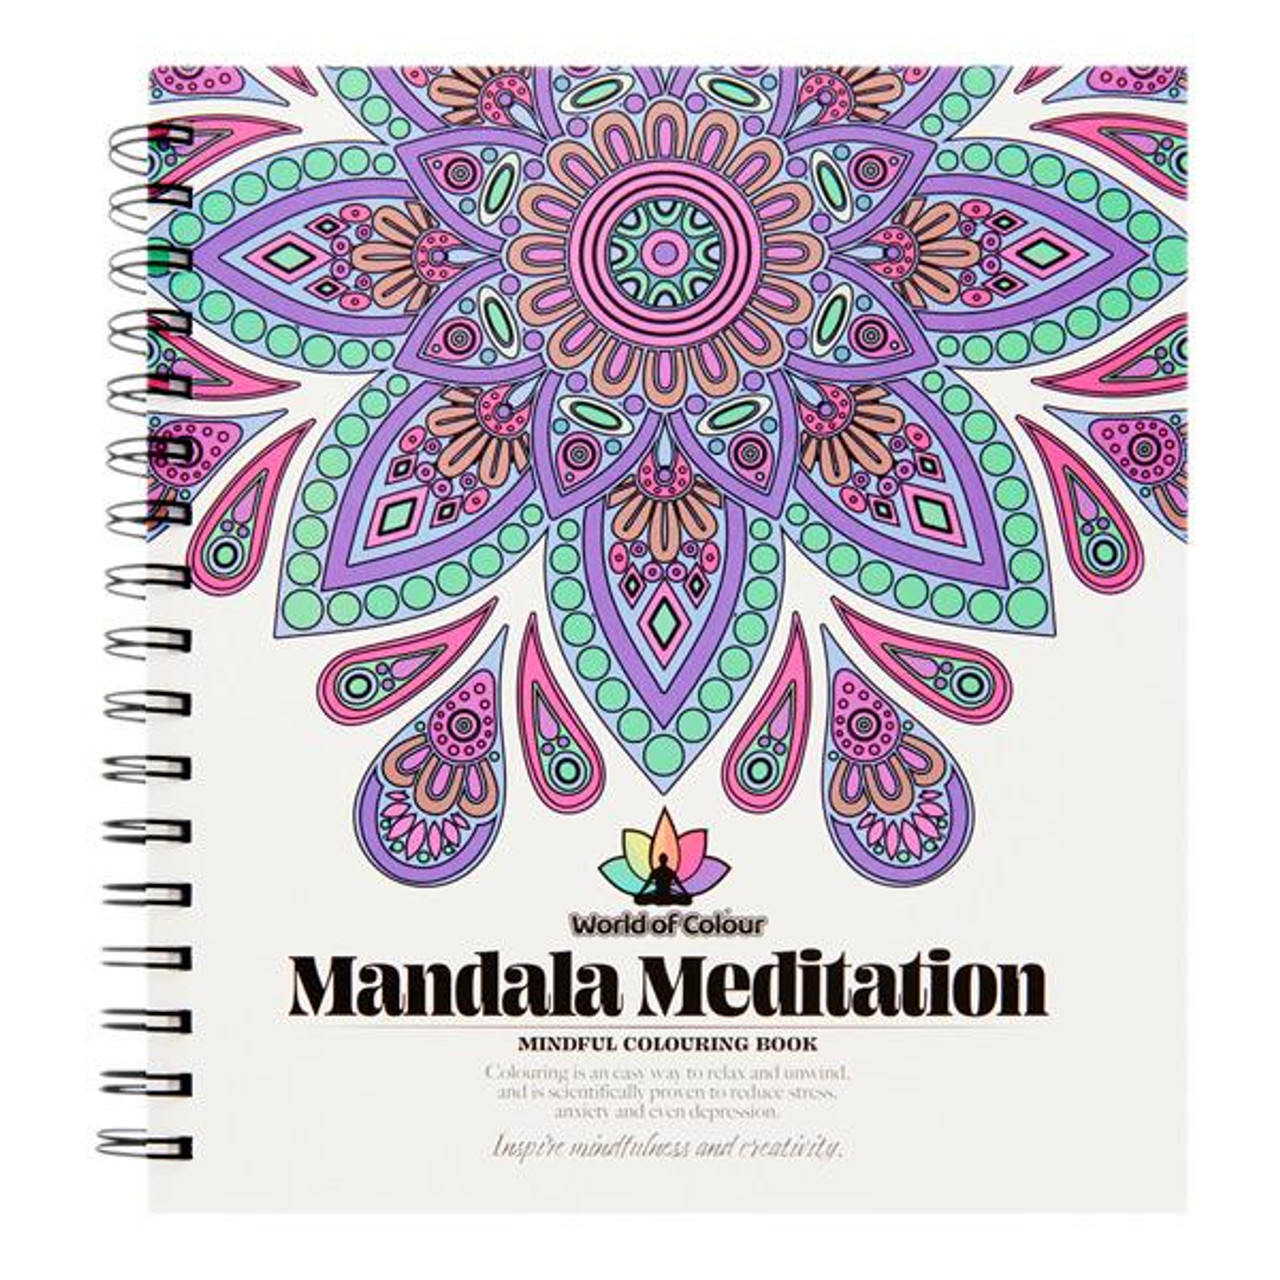 Adult Coloring Books Deep Relaxation: Templates for Meditation and Calming  (Paperback)